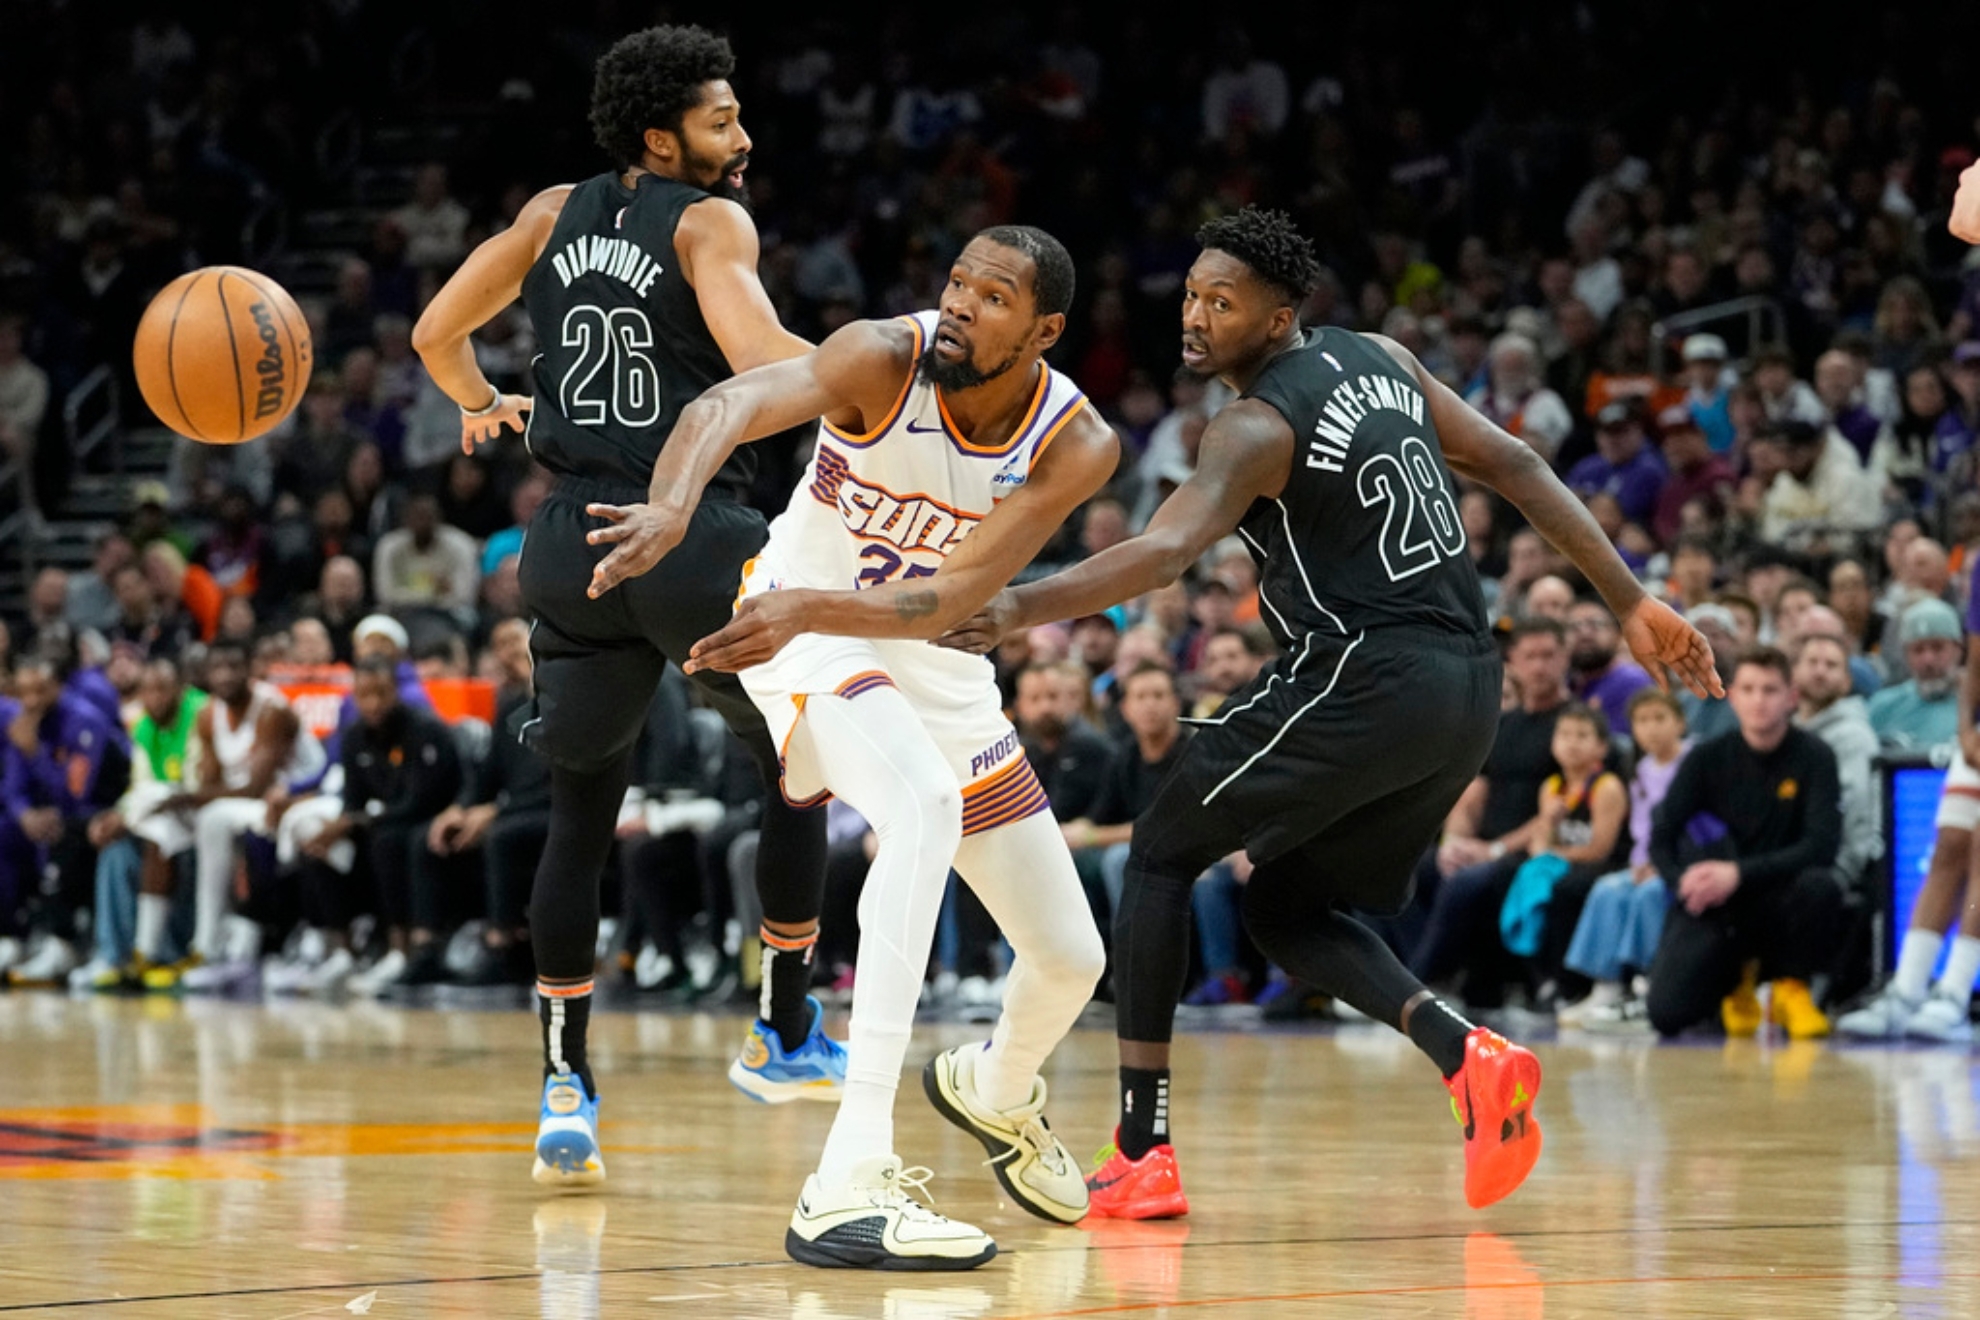 Phoenix Suns forward Kevin Durant (35) passes between Brooklyn Nets forward Dorian Finney-Smith (28) and guard Spencer Dinwiddie (26) during the first half of an NBA basketball game, Wednesday, Dec. 13, 2023, in Phoenix. (AP Photo/Matt York)